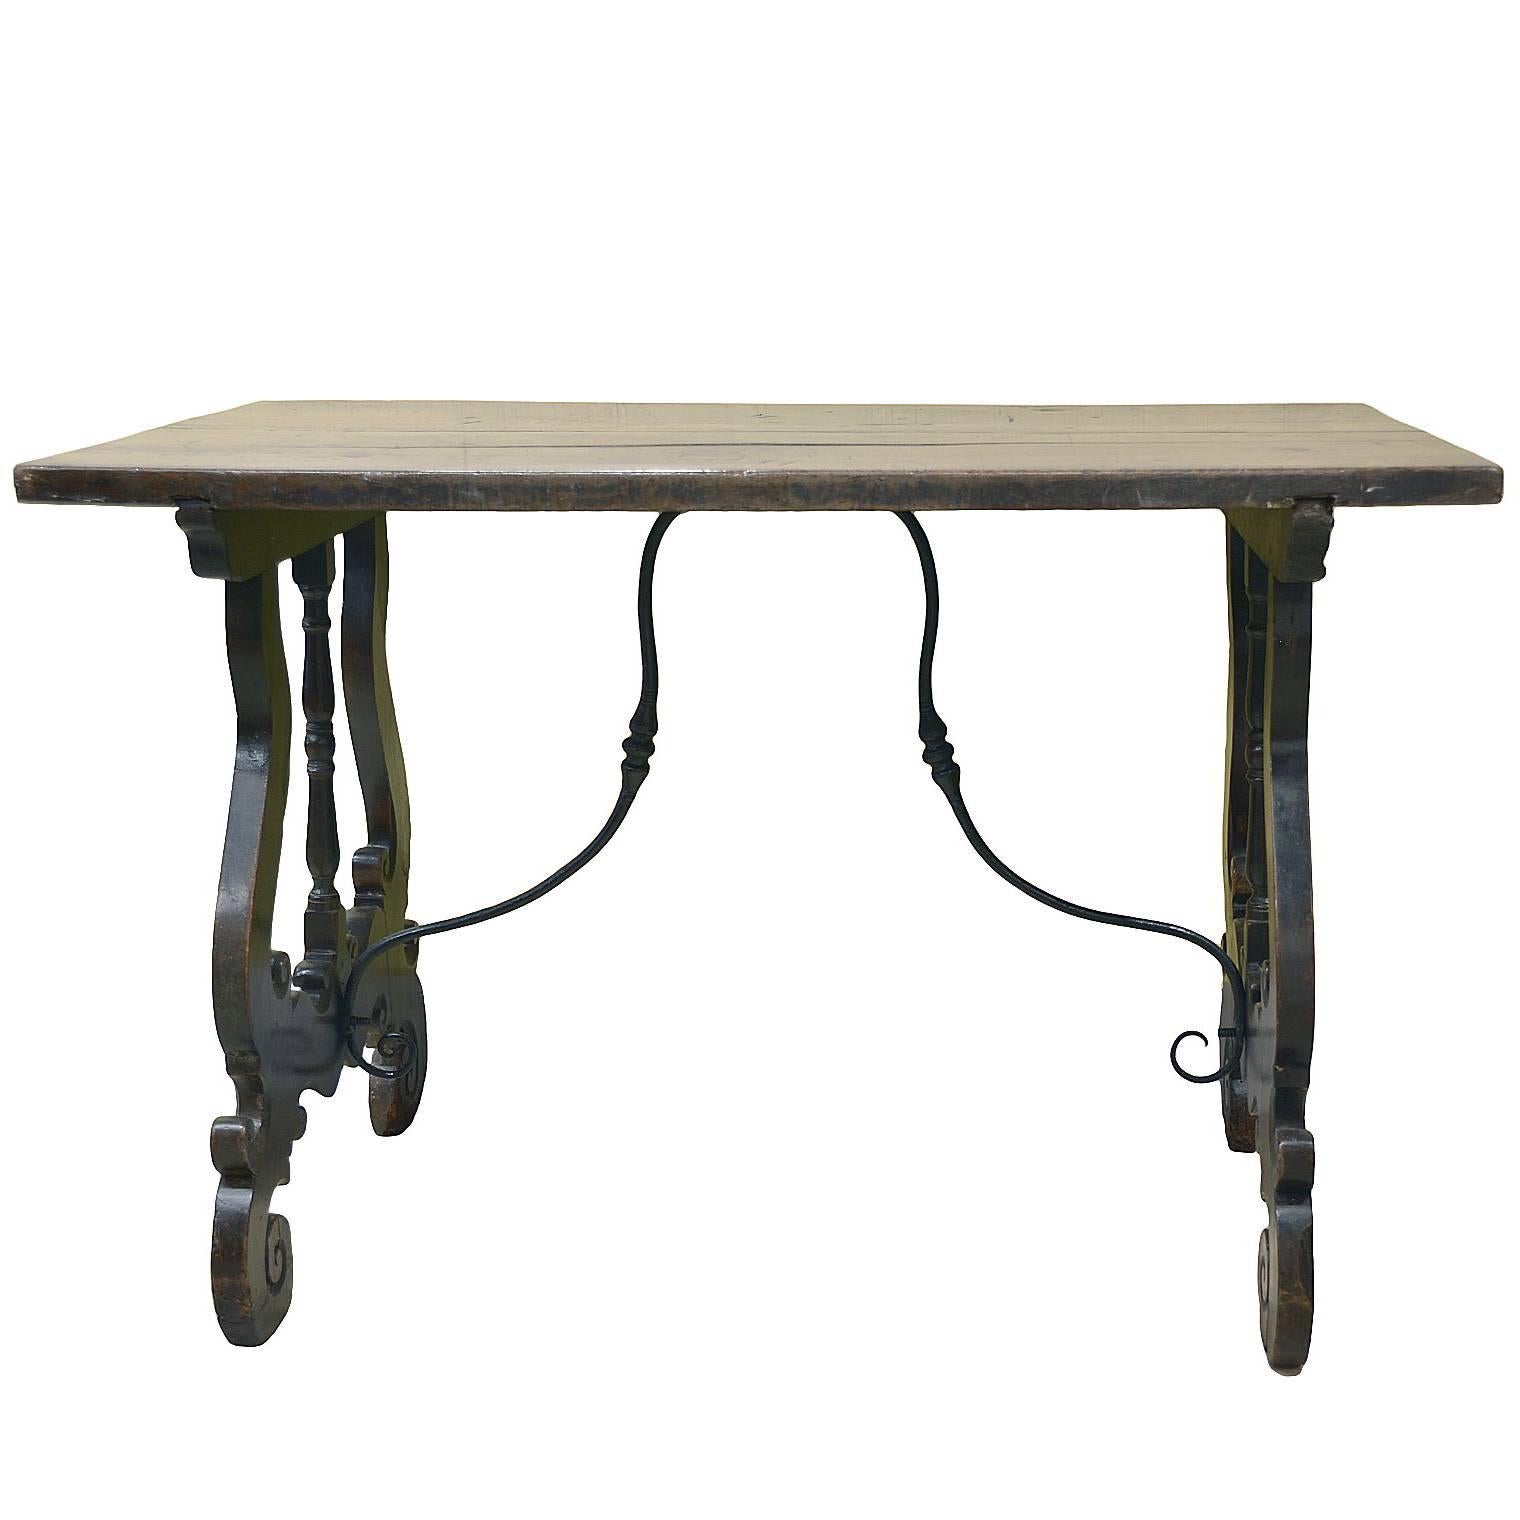 18th Century Spanish Walnut Dining Table with Iron Supports